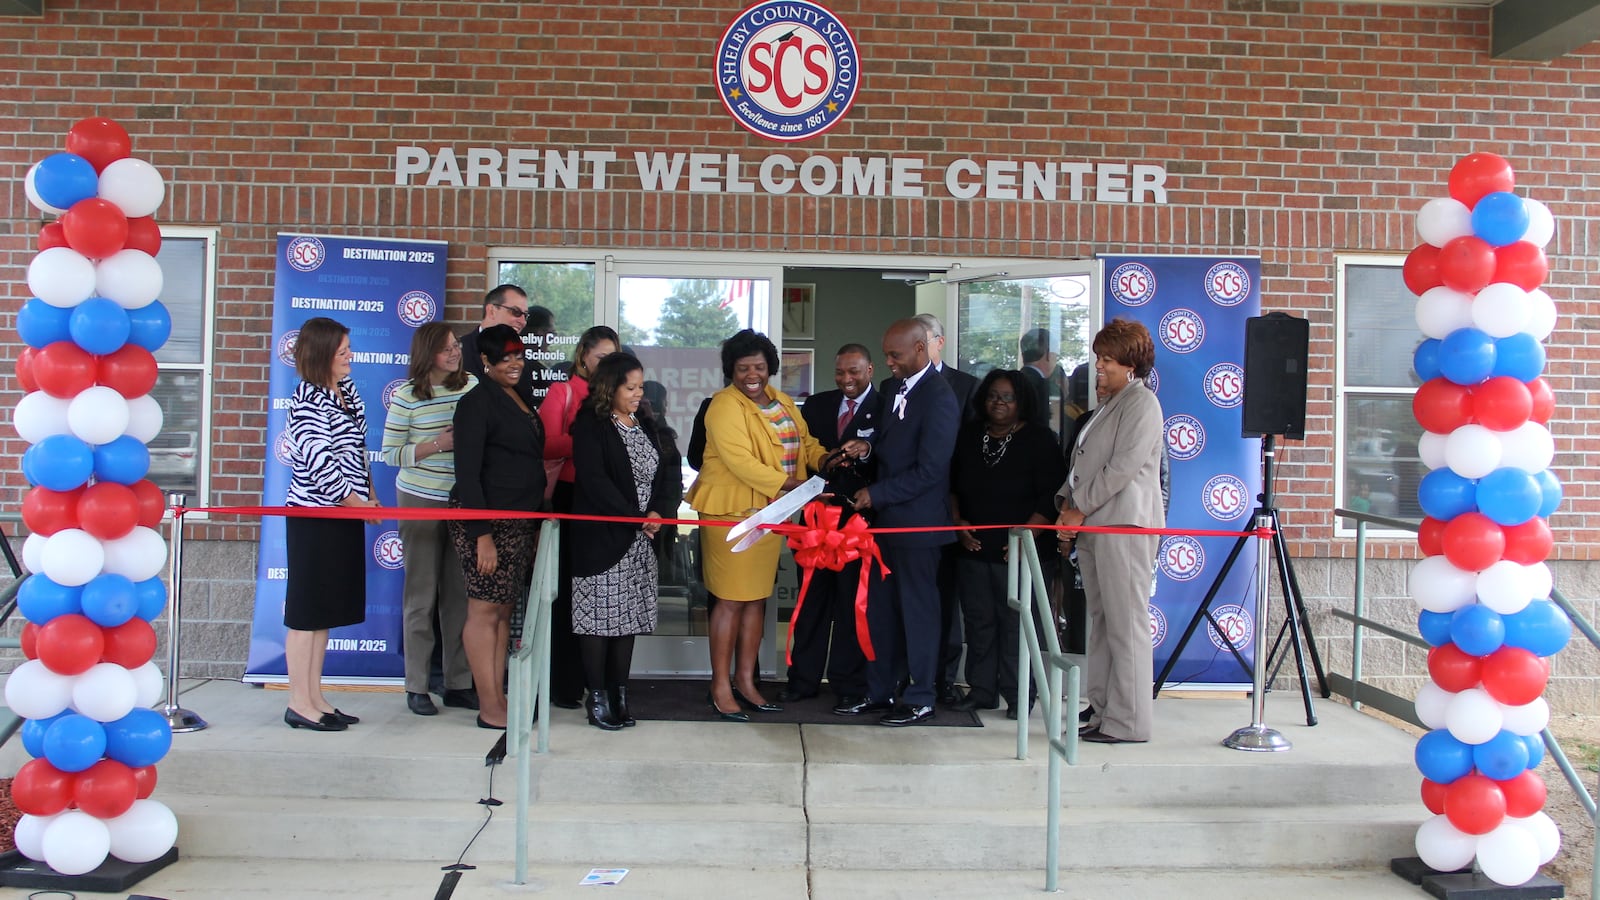 Surrounding by supporters, Superintendent Dorsey Hopson cuts the ribbon officially opening Shelby County Schools' new parent welcome center in Memphis.